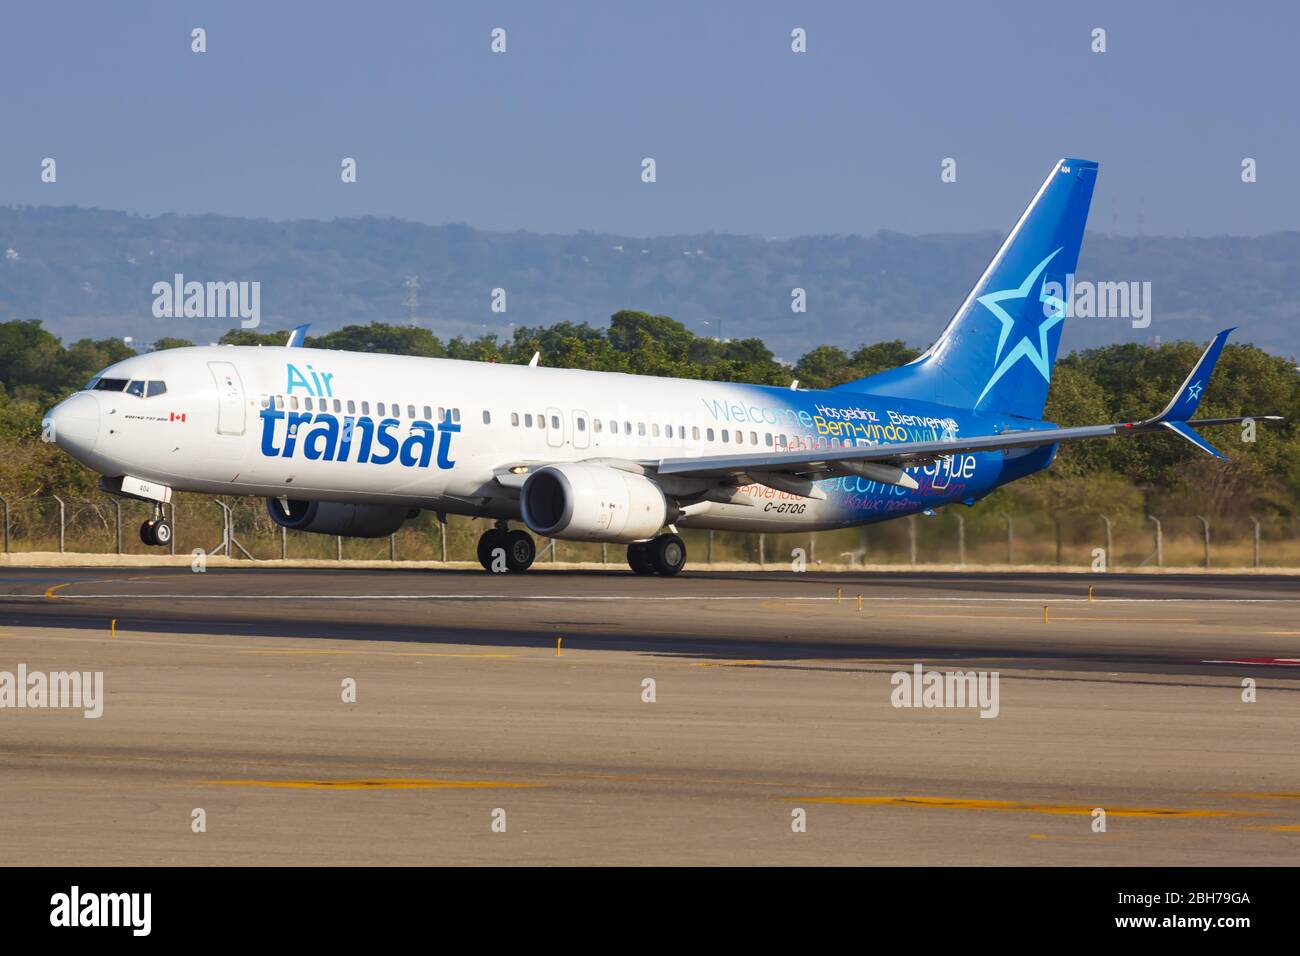 Cartagena, Colombia – January 29, 2019: Air Transat Boeing 737-800 airplane at Cartagena airport (CTG) in Colombia. Boeing is an American aircraft man Stock Photo